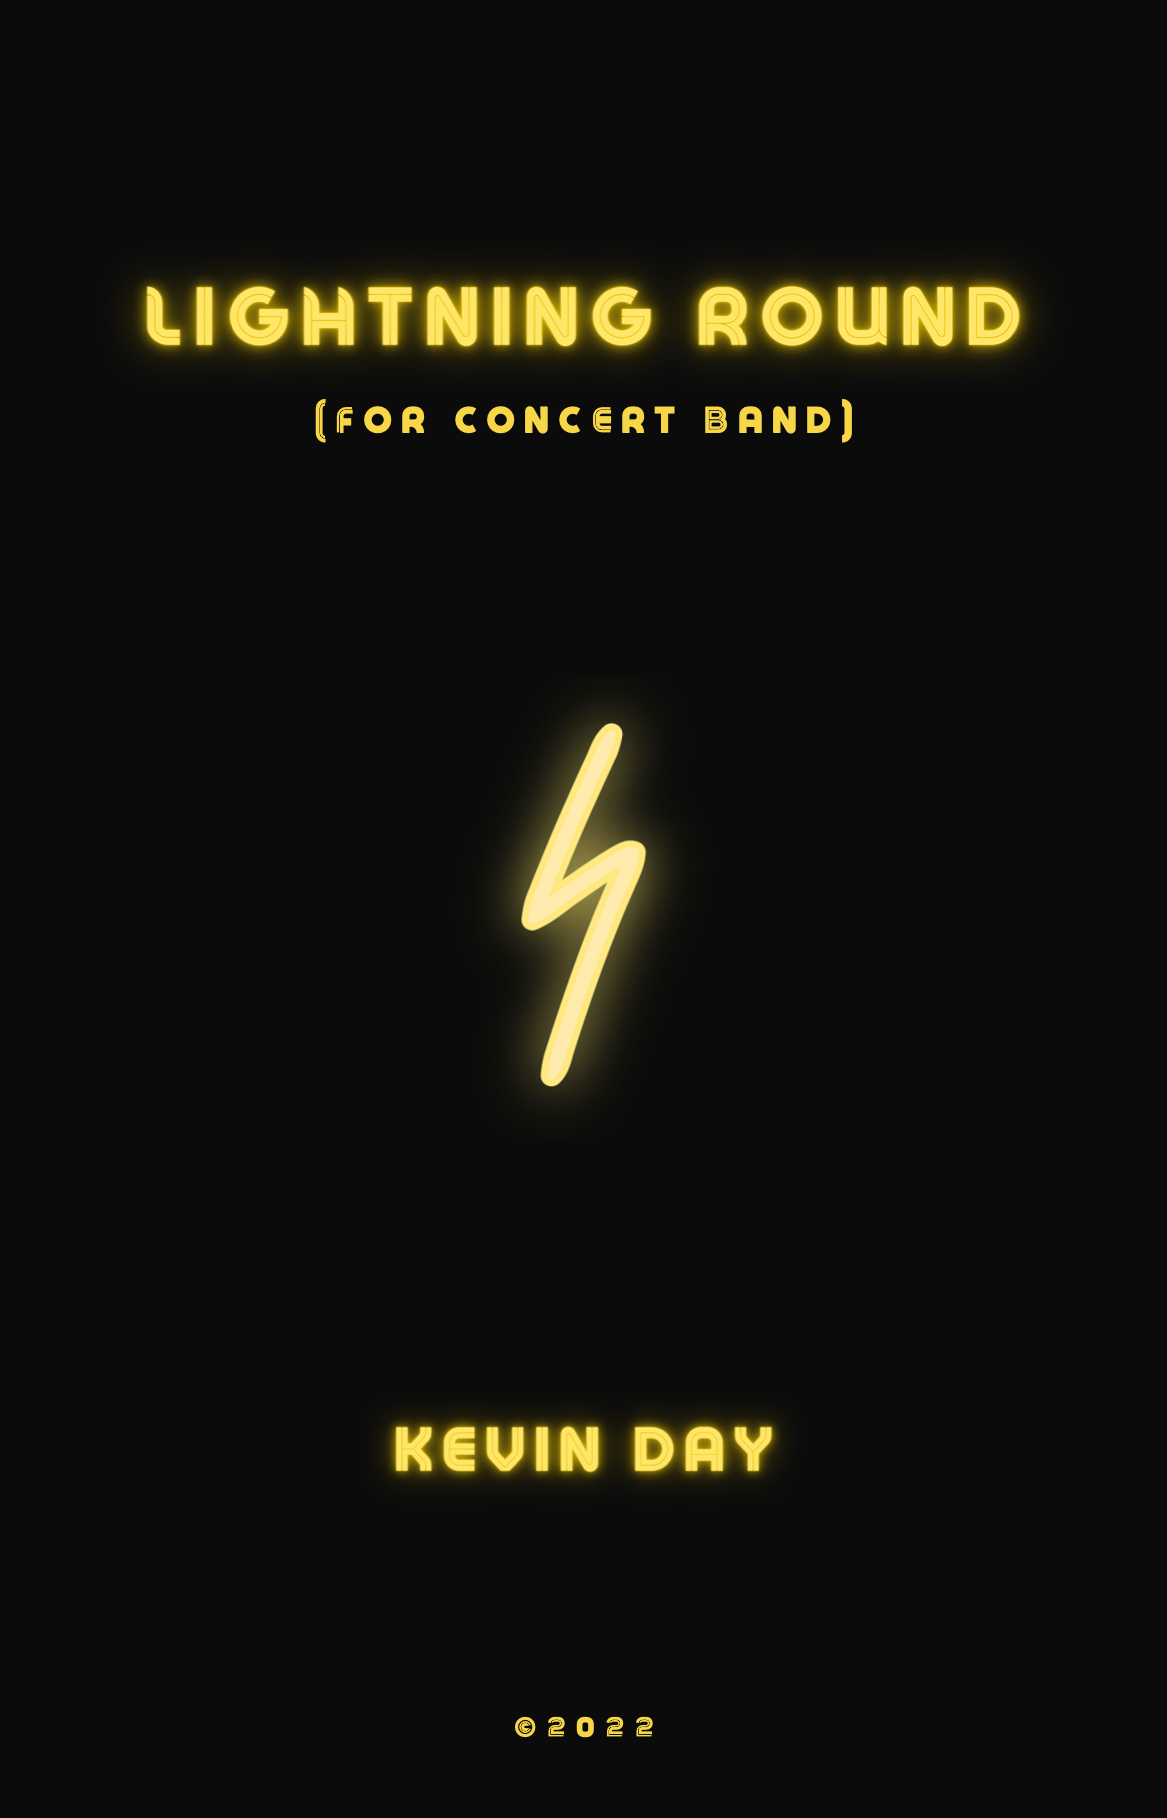 Lightning Round by Kevin Day